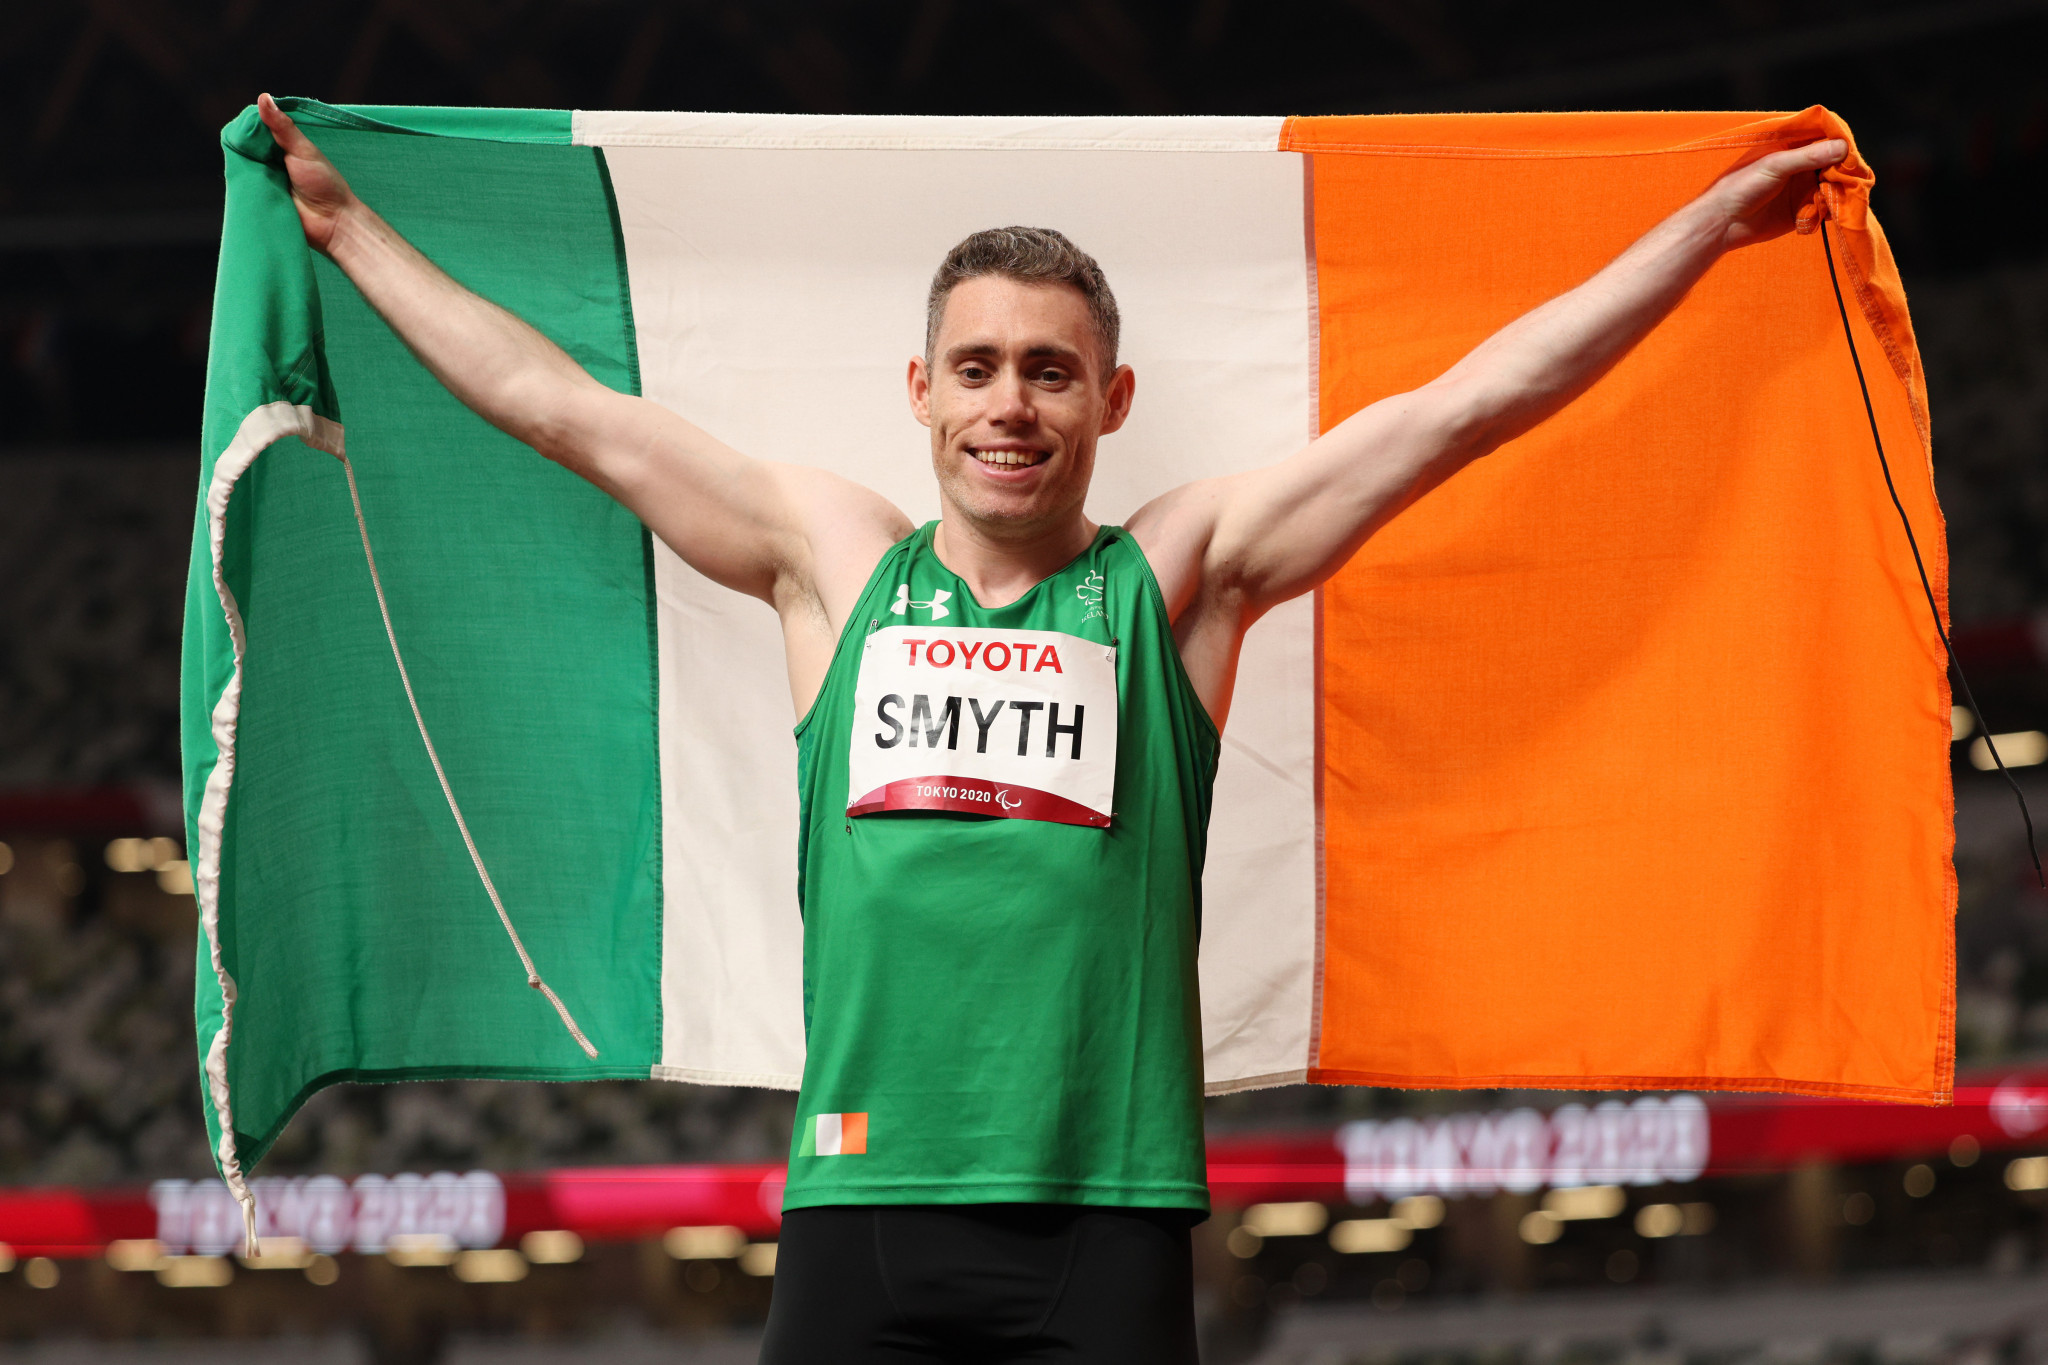 Experience proved invaluable for Ireland's Jason Smyth, who edged out Algeria's Skander Djamil Athmani in a photo finish to claim his sixth Paralympic gold medal ©Getty Images